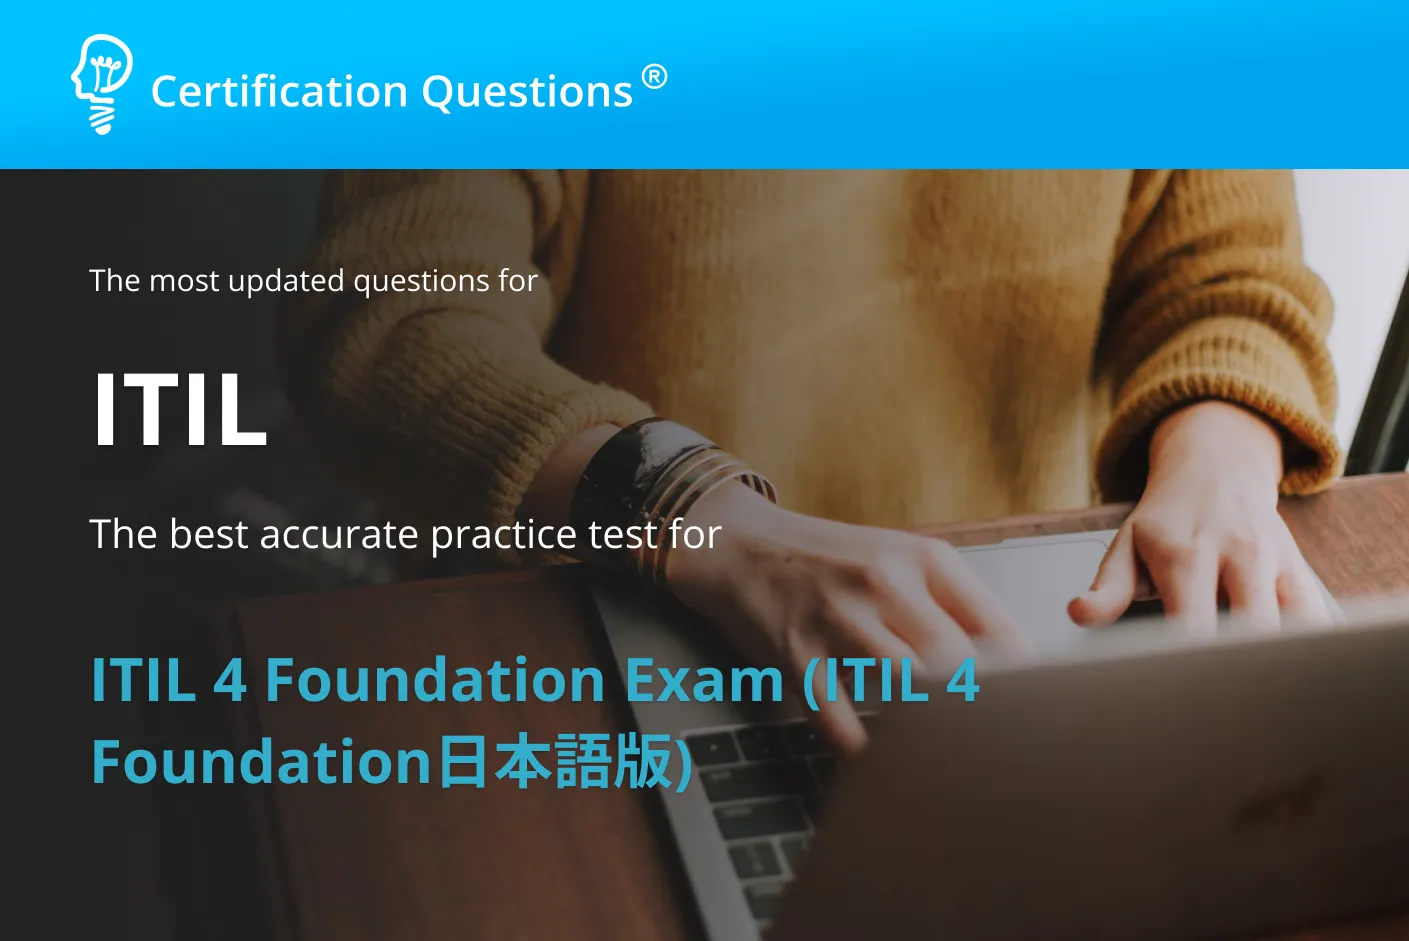 This a study guide about the ITIL 4 foundation exam in the United States of America.